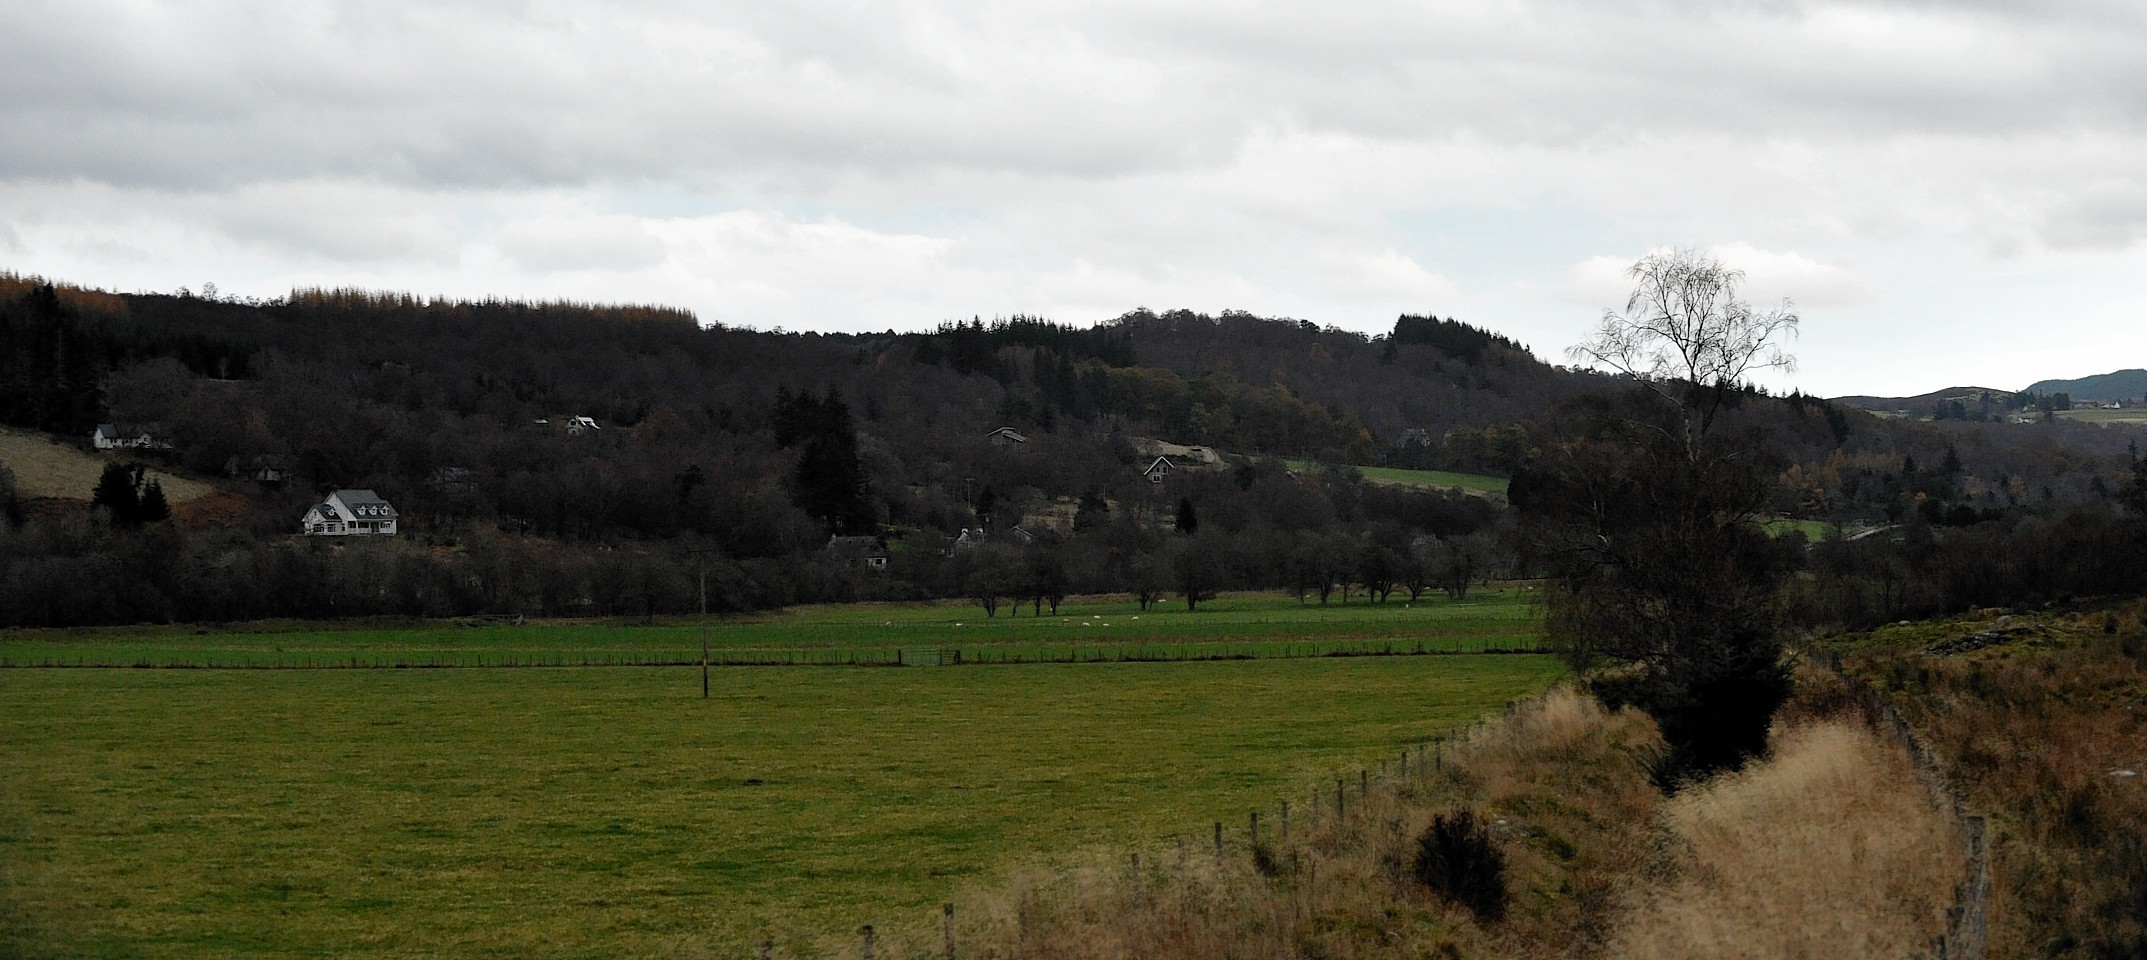 The proposed site of Cnoc an Eas